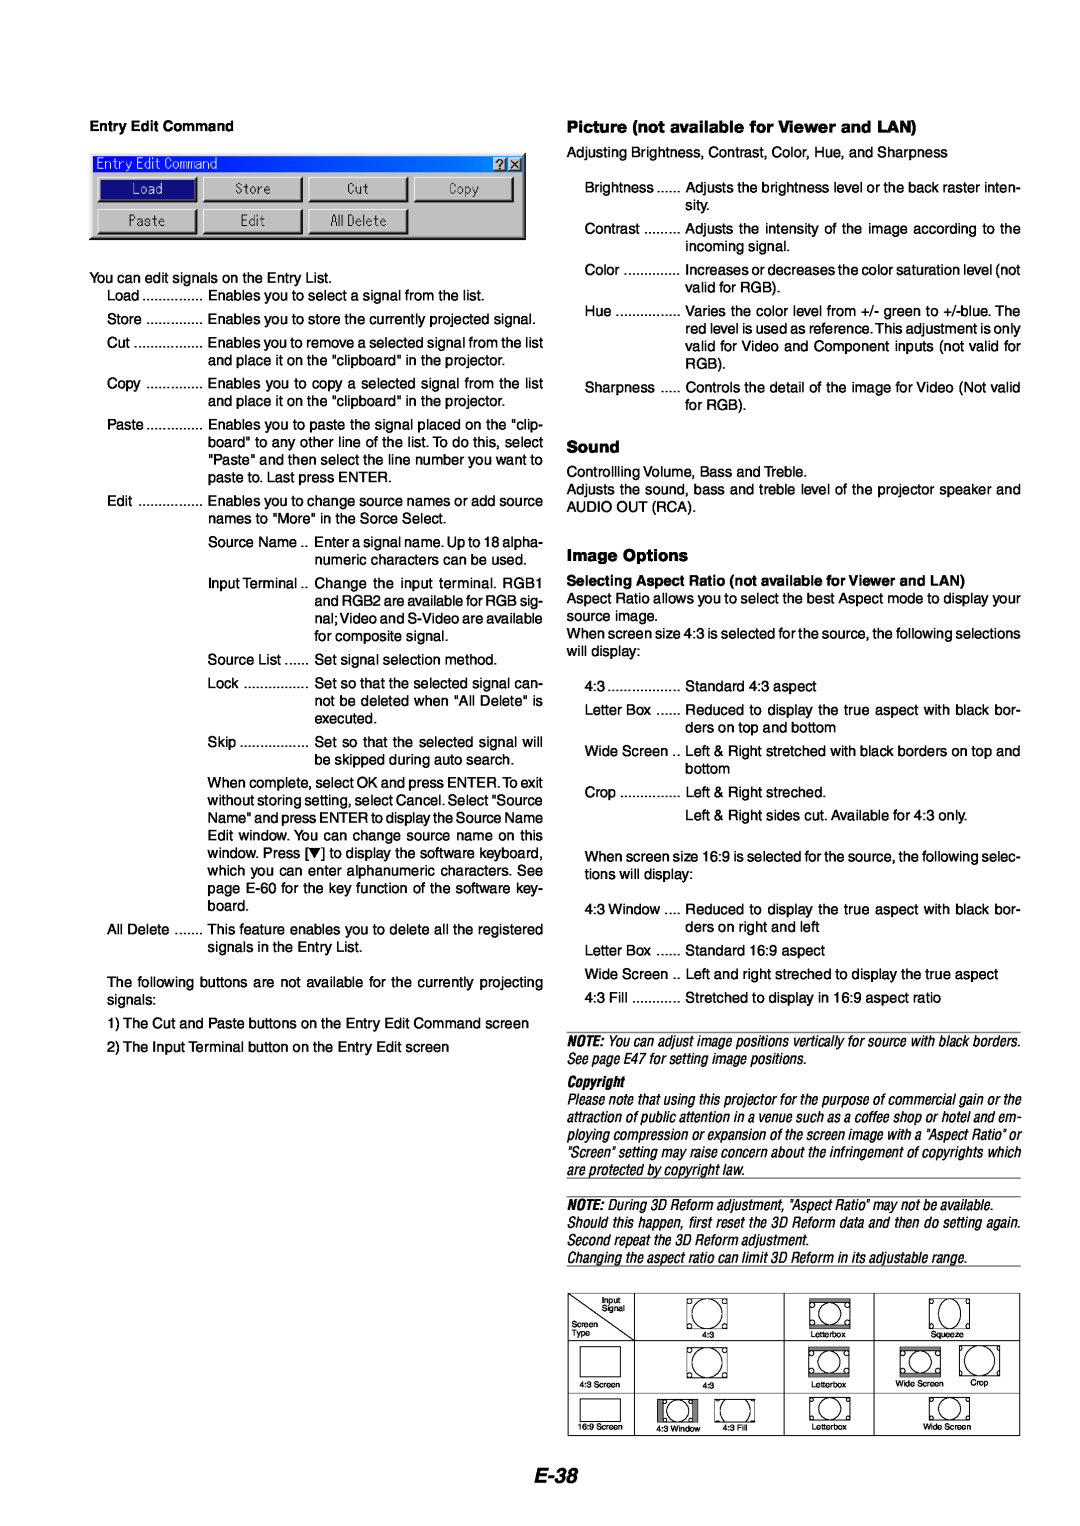 NEC MT1060 user manual E-38, Picture not available for Viewer and LAN, Sound, Image Options, Copyright 